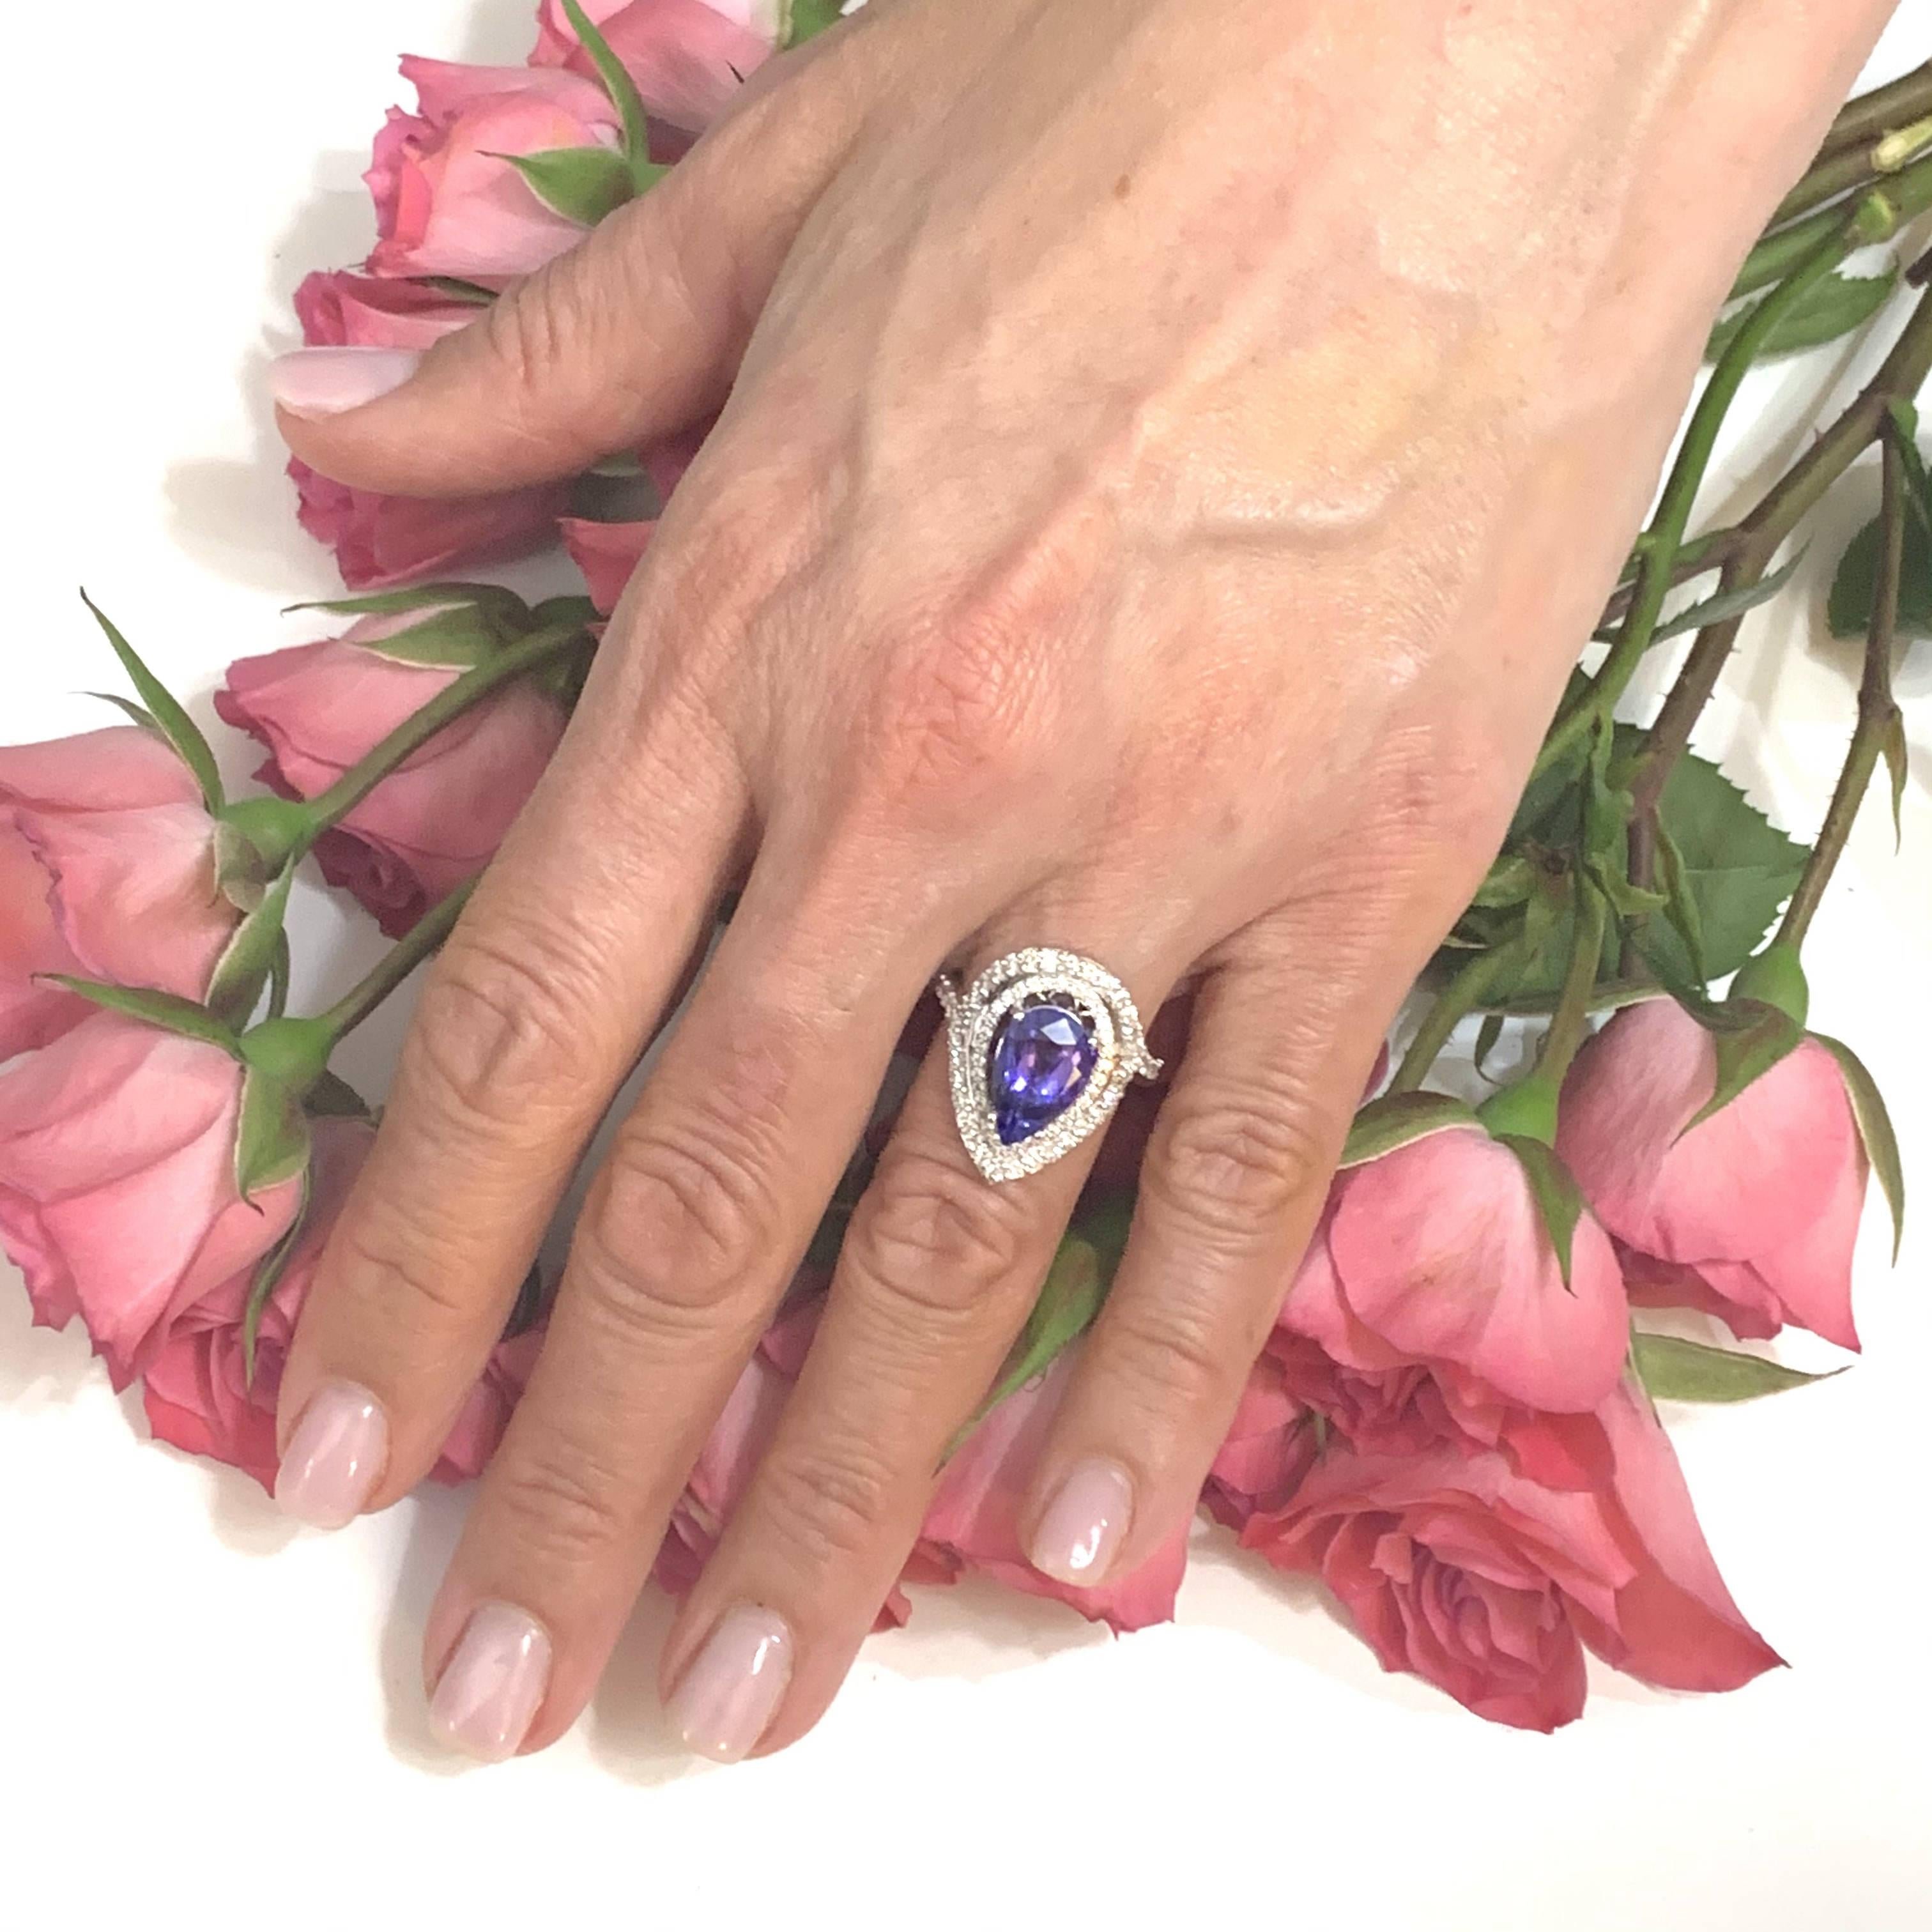 Natural Finely Faceted Quality Tanzanite Diamond Ring 14k Gold 4.54 TCW Size 5.75 GIA Certified $5,950 111877

This is a Unique Custom Made Glamorous Piece of Jewelry!

Nothing says, “I Love you” more than Diamonds and Pearls!

This item has been